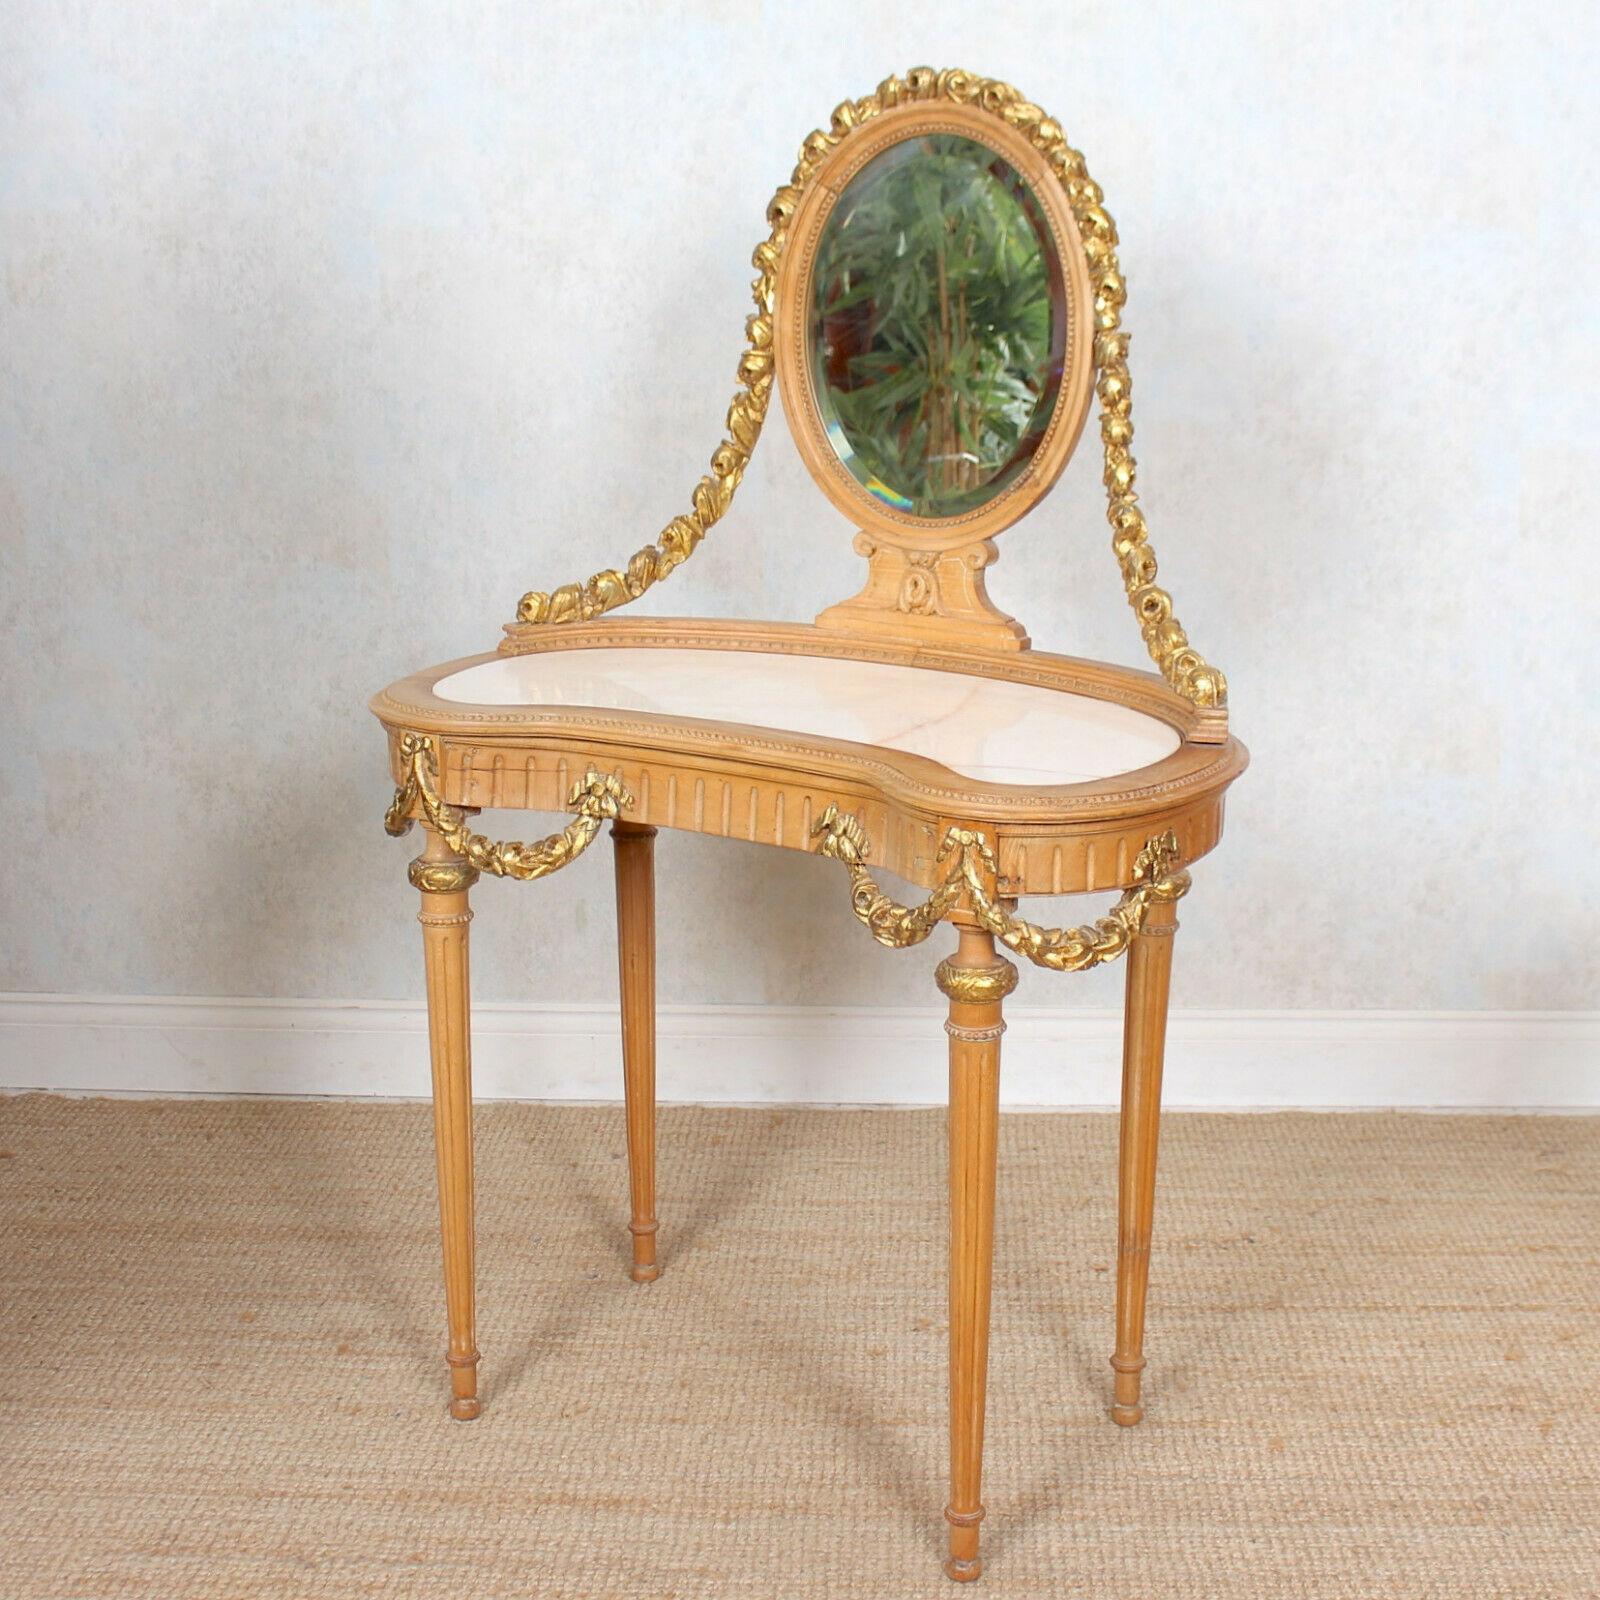 Neoclassical Marble Dressing Table Gilt Mirrored Vanity Satinwood For Sale 3